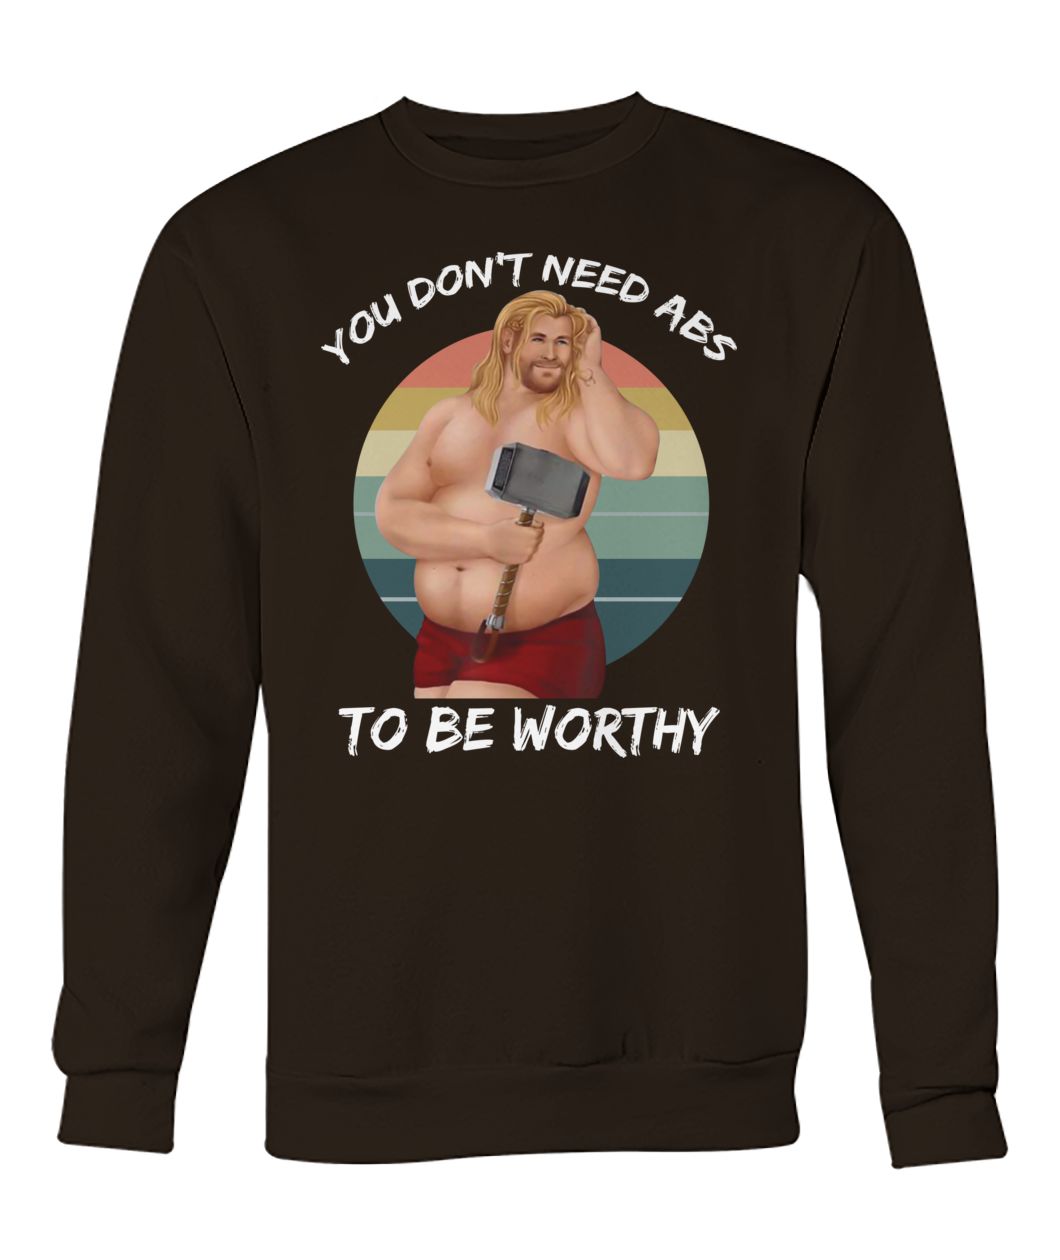 Vintage fat-thor you don't need abs to be worthy crew neck sweatshirt